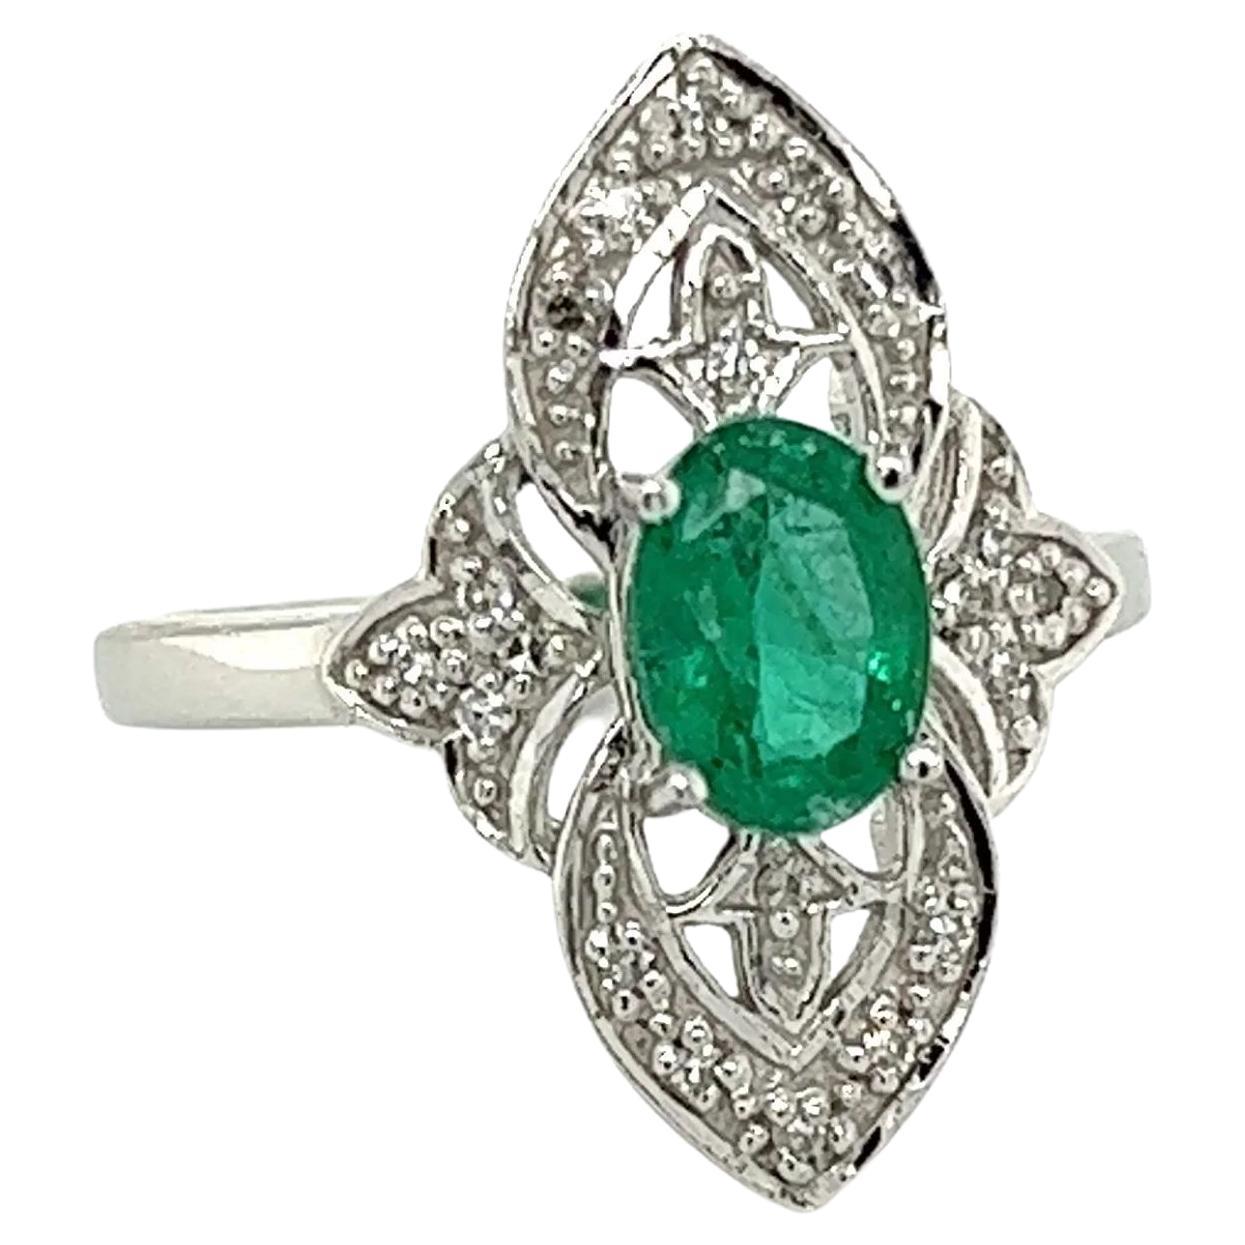 Simply Beautiful! Finely detailed Art Deco Revival Diamond and Emerald Gold Navette Cocktail Ring. Centering a securely nestled Oval Emerald, approx. 0.55 Carat, surrounded by Diamonds, approx. 0.09tcw. The ring is Hand crafted in 18K White Gold.